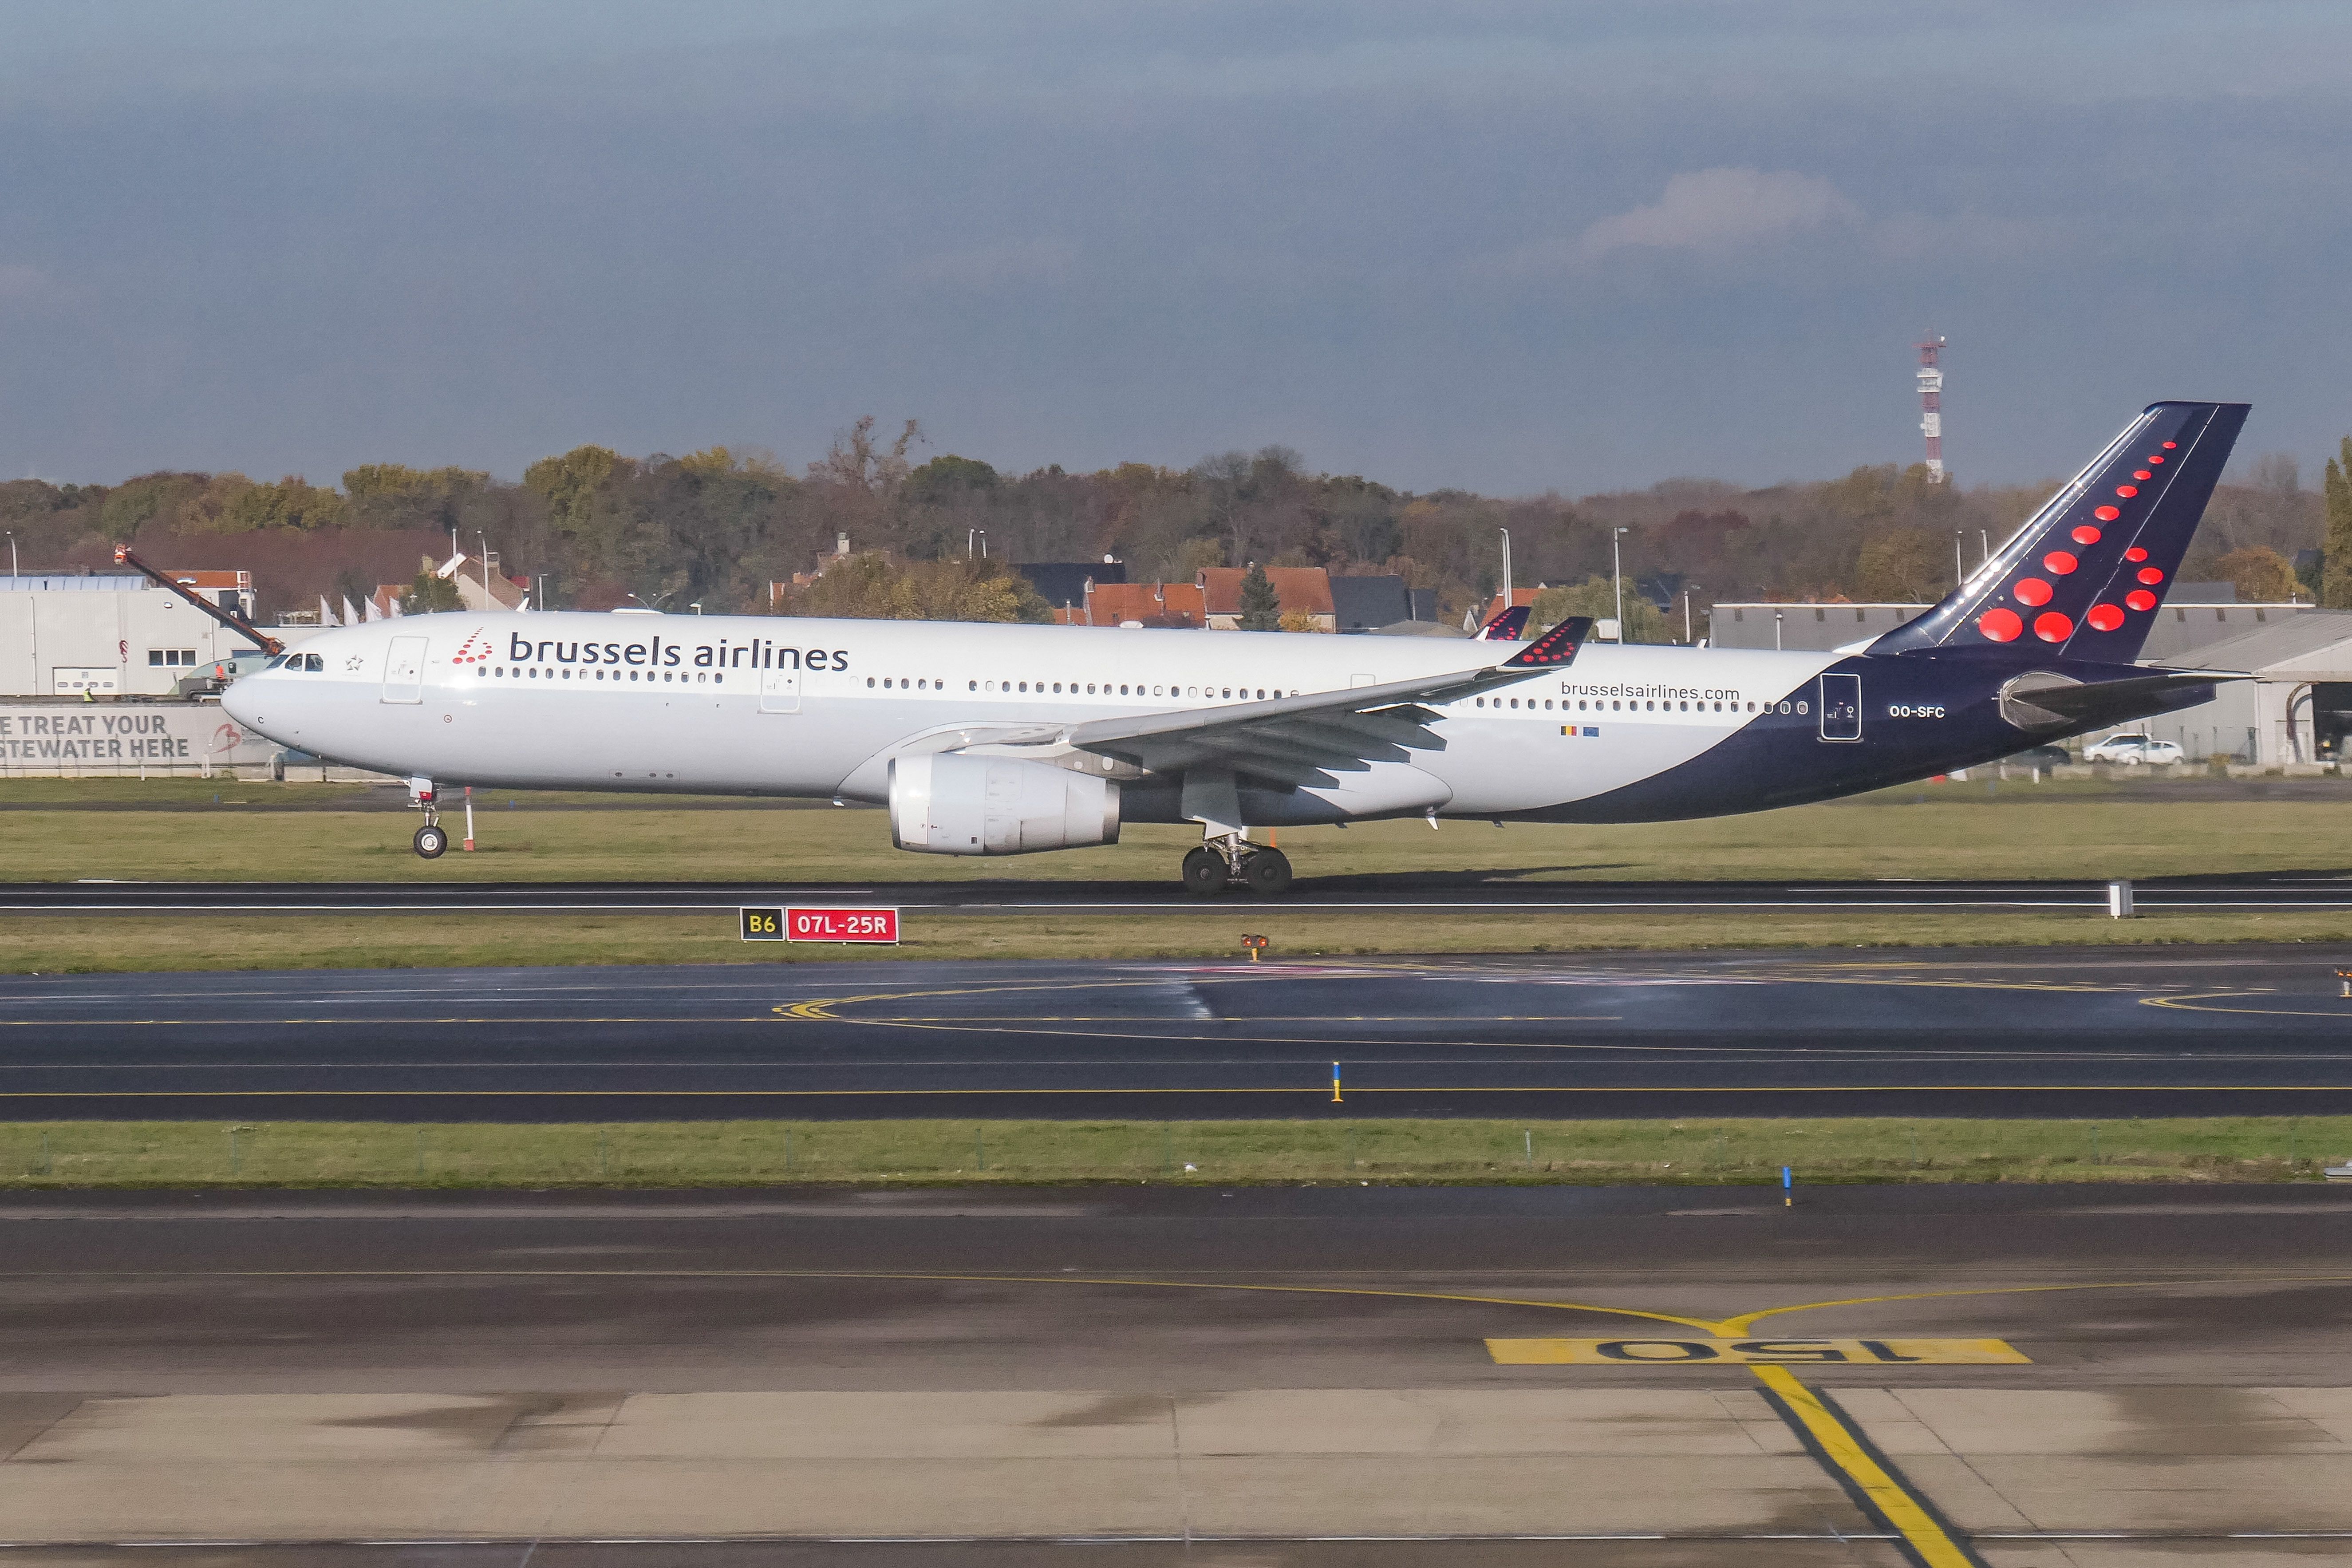 Brussels Airlines Airbus A330 on runway